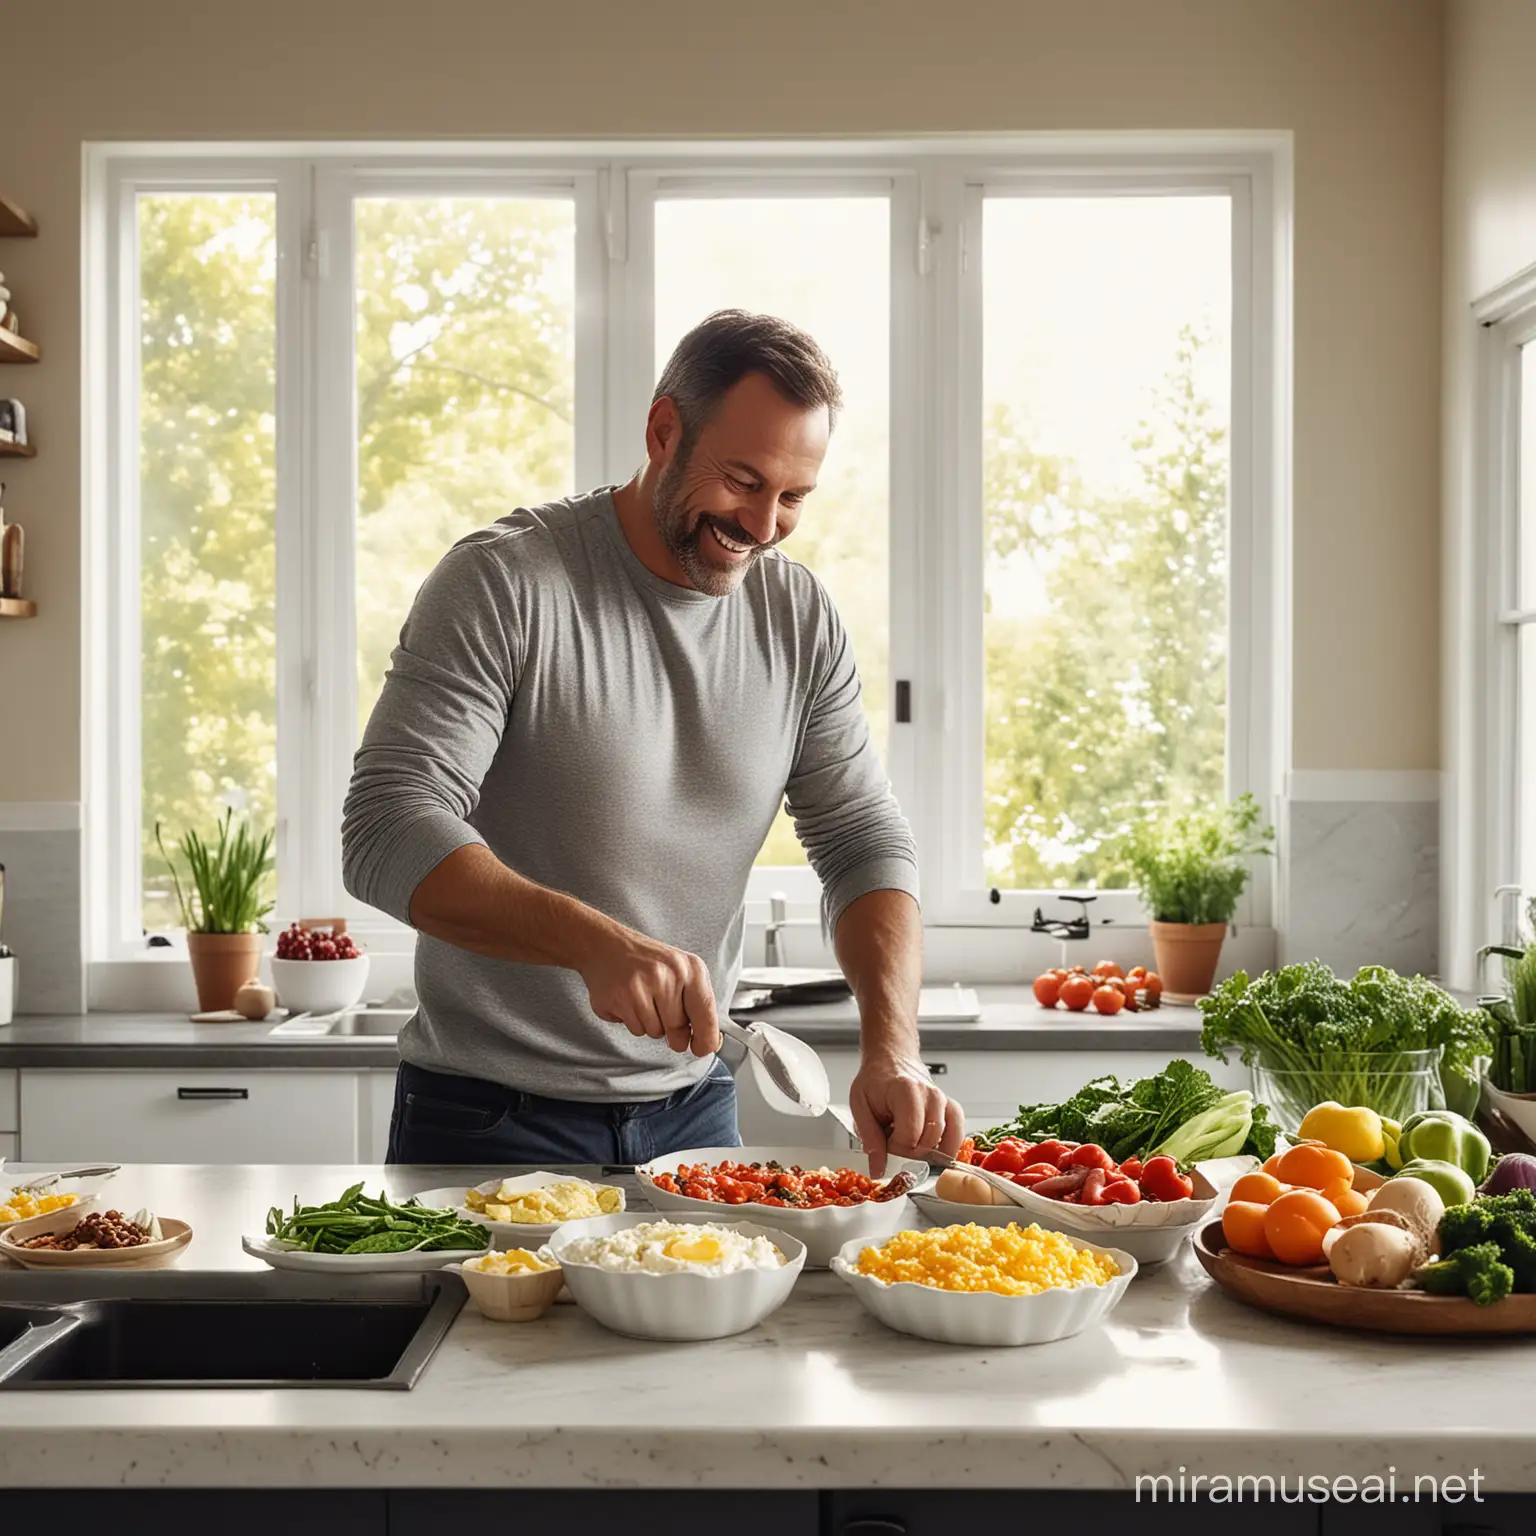 "A smiling dad stands in the kitchen, surrounded by ingredients for a protein-rich breakfast. He's seen cracking eggs into a pan, with vibrant vegetables and a bowl of Greek yogurt nearby. The morning sunlight streams through the window, illuminating the nutritious spread."